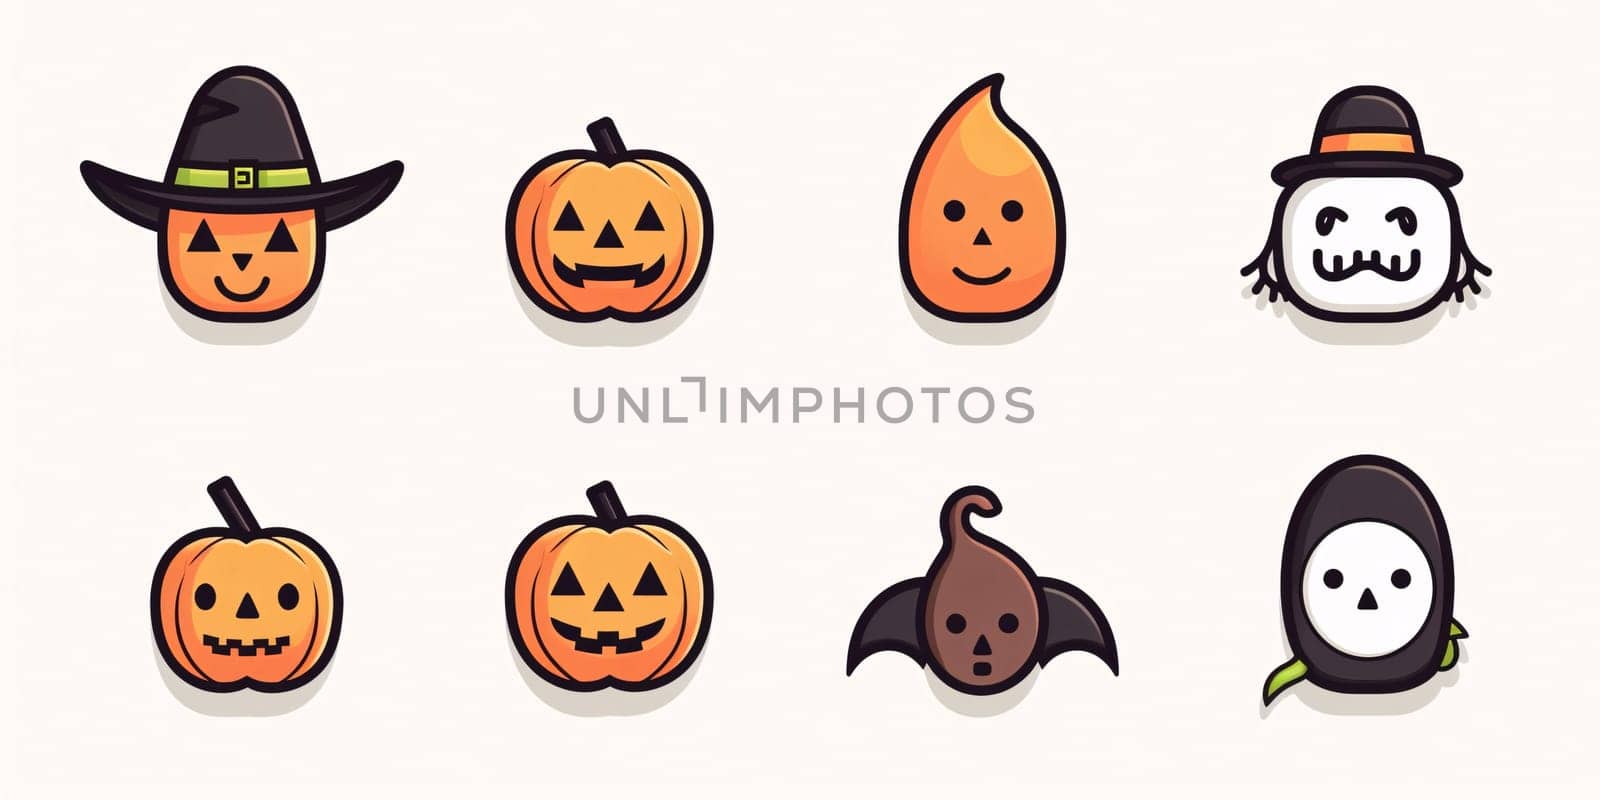 New icons collection: Halloween pumpkin icons set. Cute cartoon characters. Vector illustration.